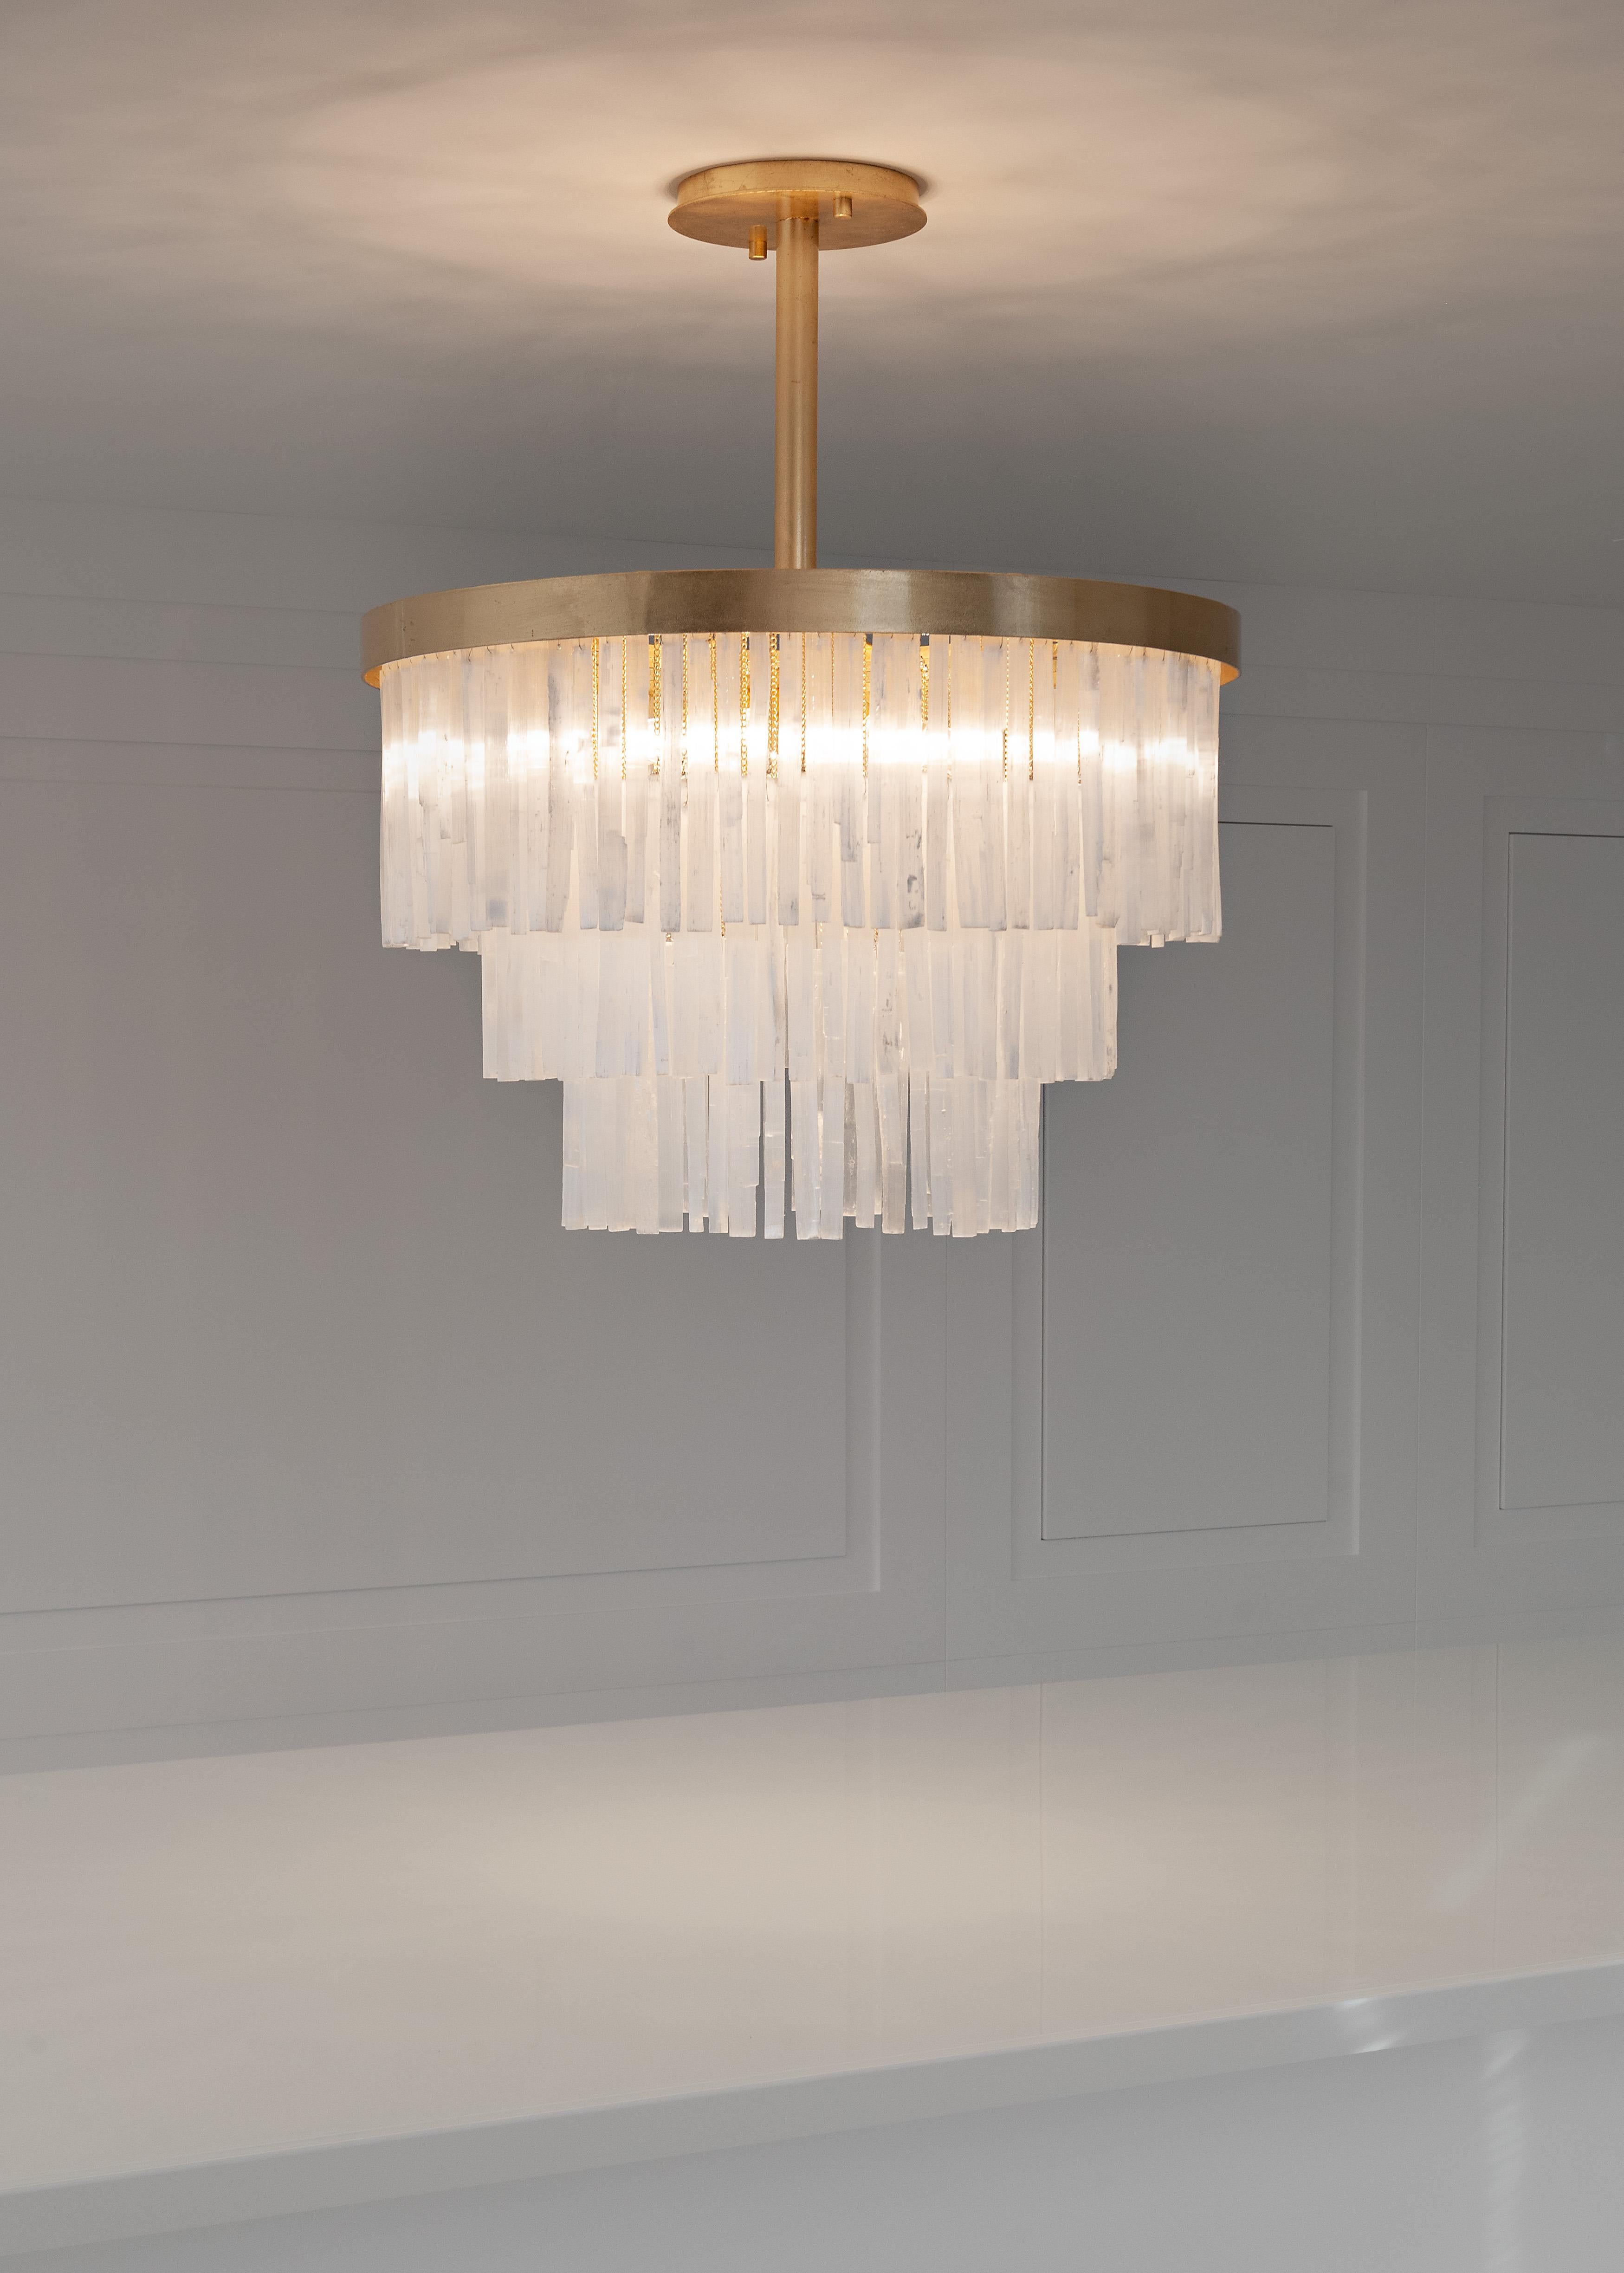 Selenite chandelier by Aver
Dimensions: 80 x 80 x 60cm
Materials: Aluminum and selenite

Designed by Marcele Muraro, it is made of natural stones and inspired by the city of Casablanca, which has a rich Art Deco architectural heritage. Straight and